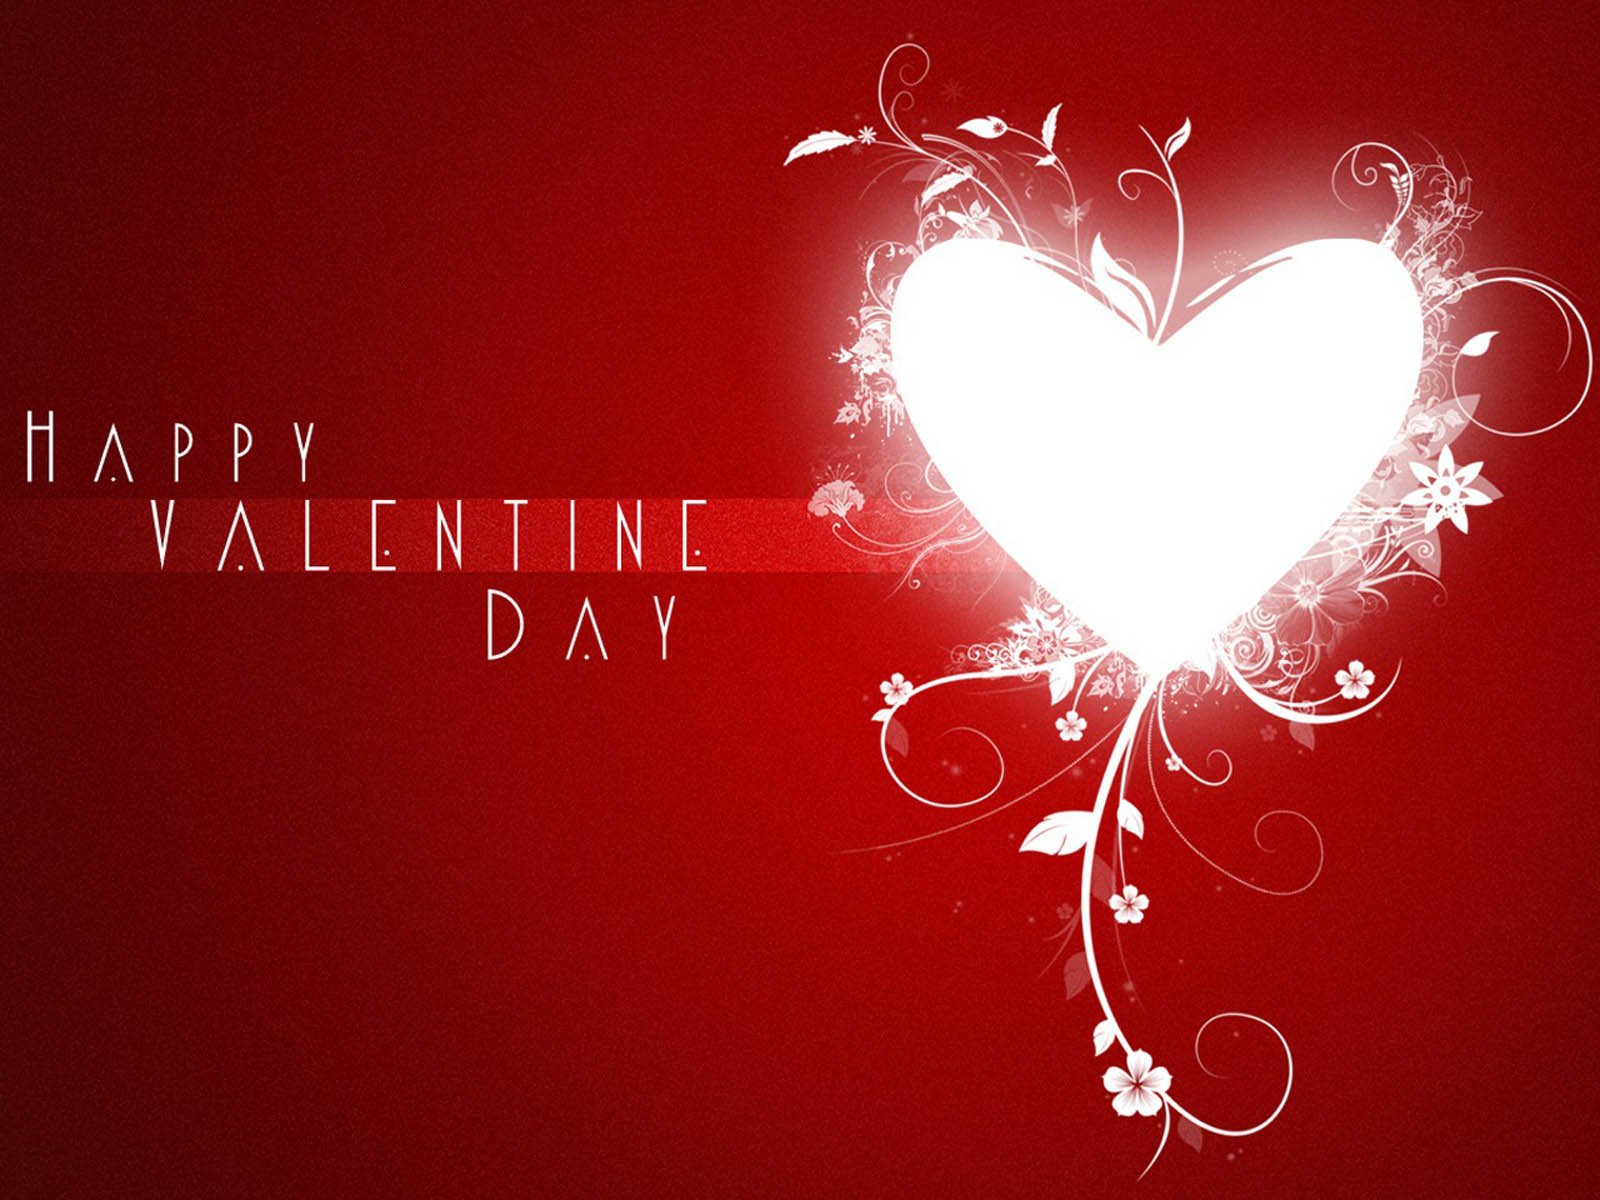  Wallpapers Valentines Day Backgrounds Valentines Day Desktop 1600x1200